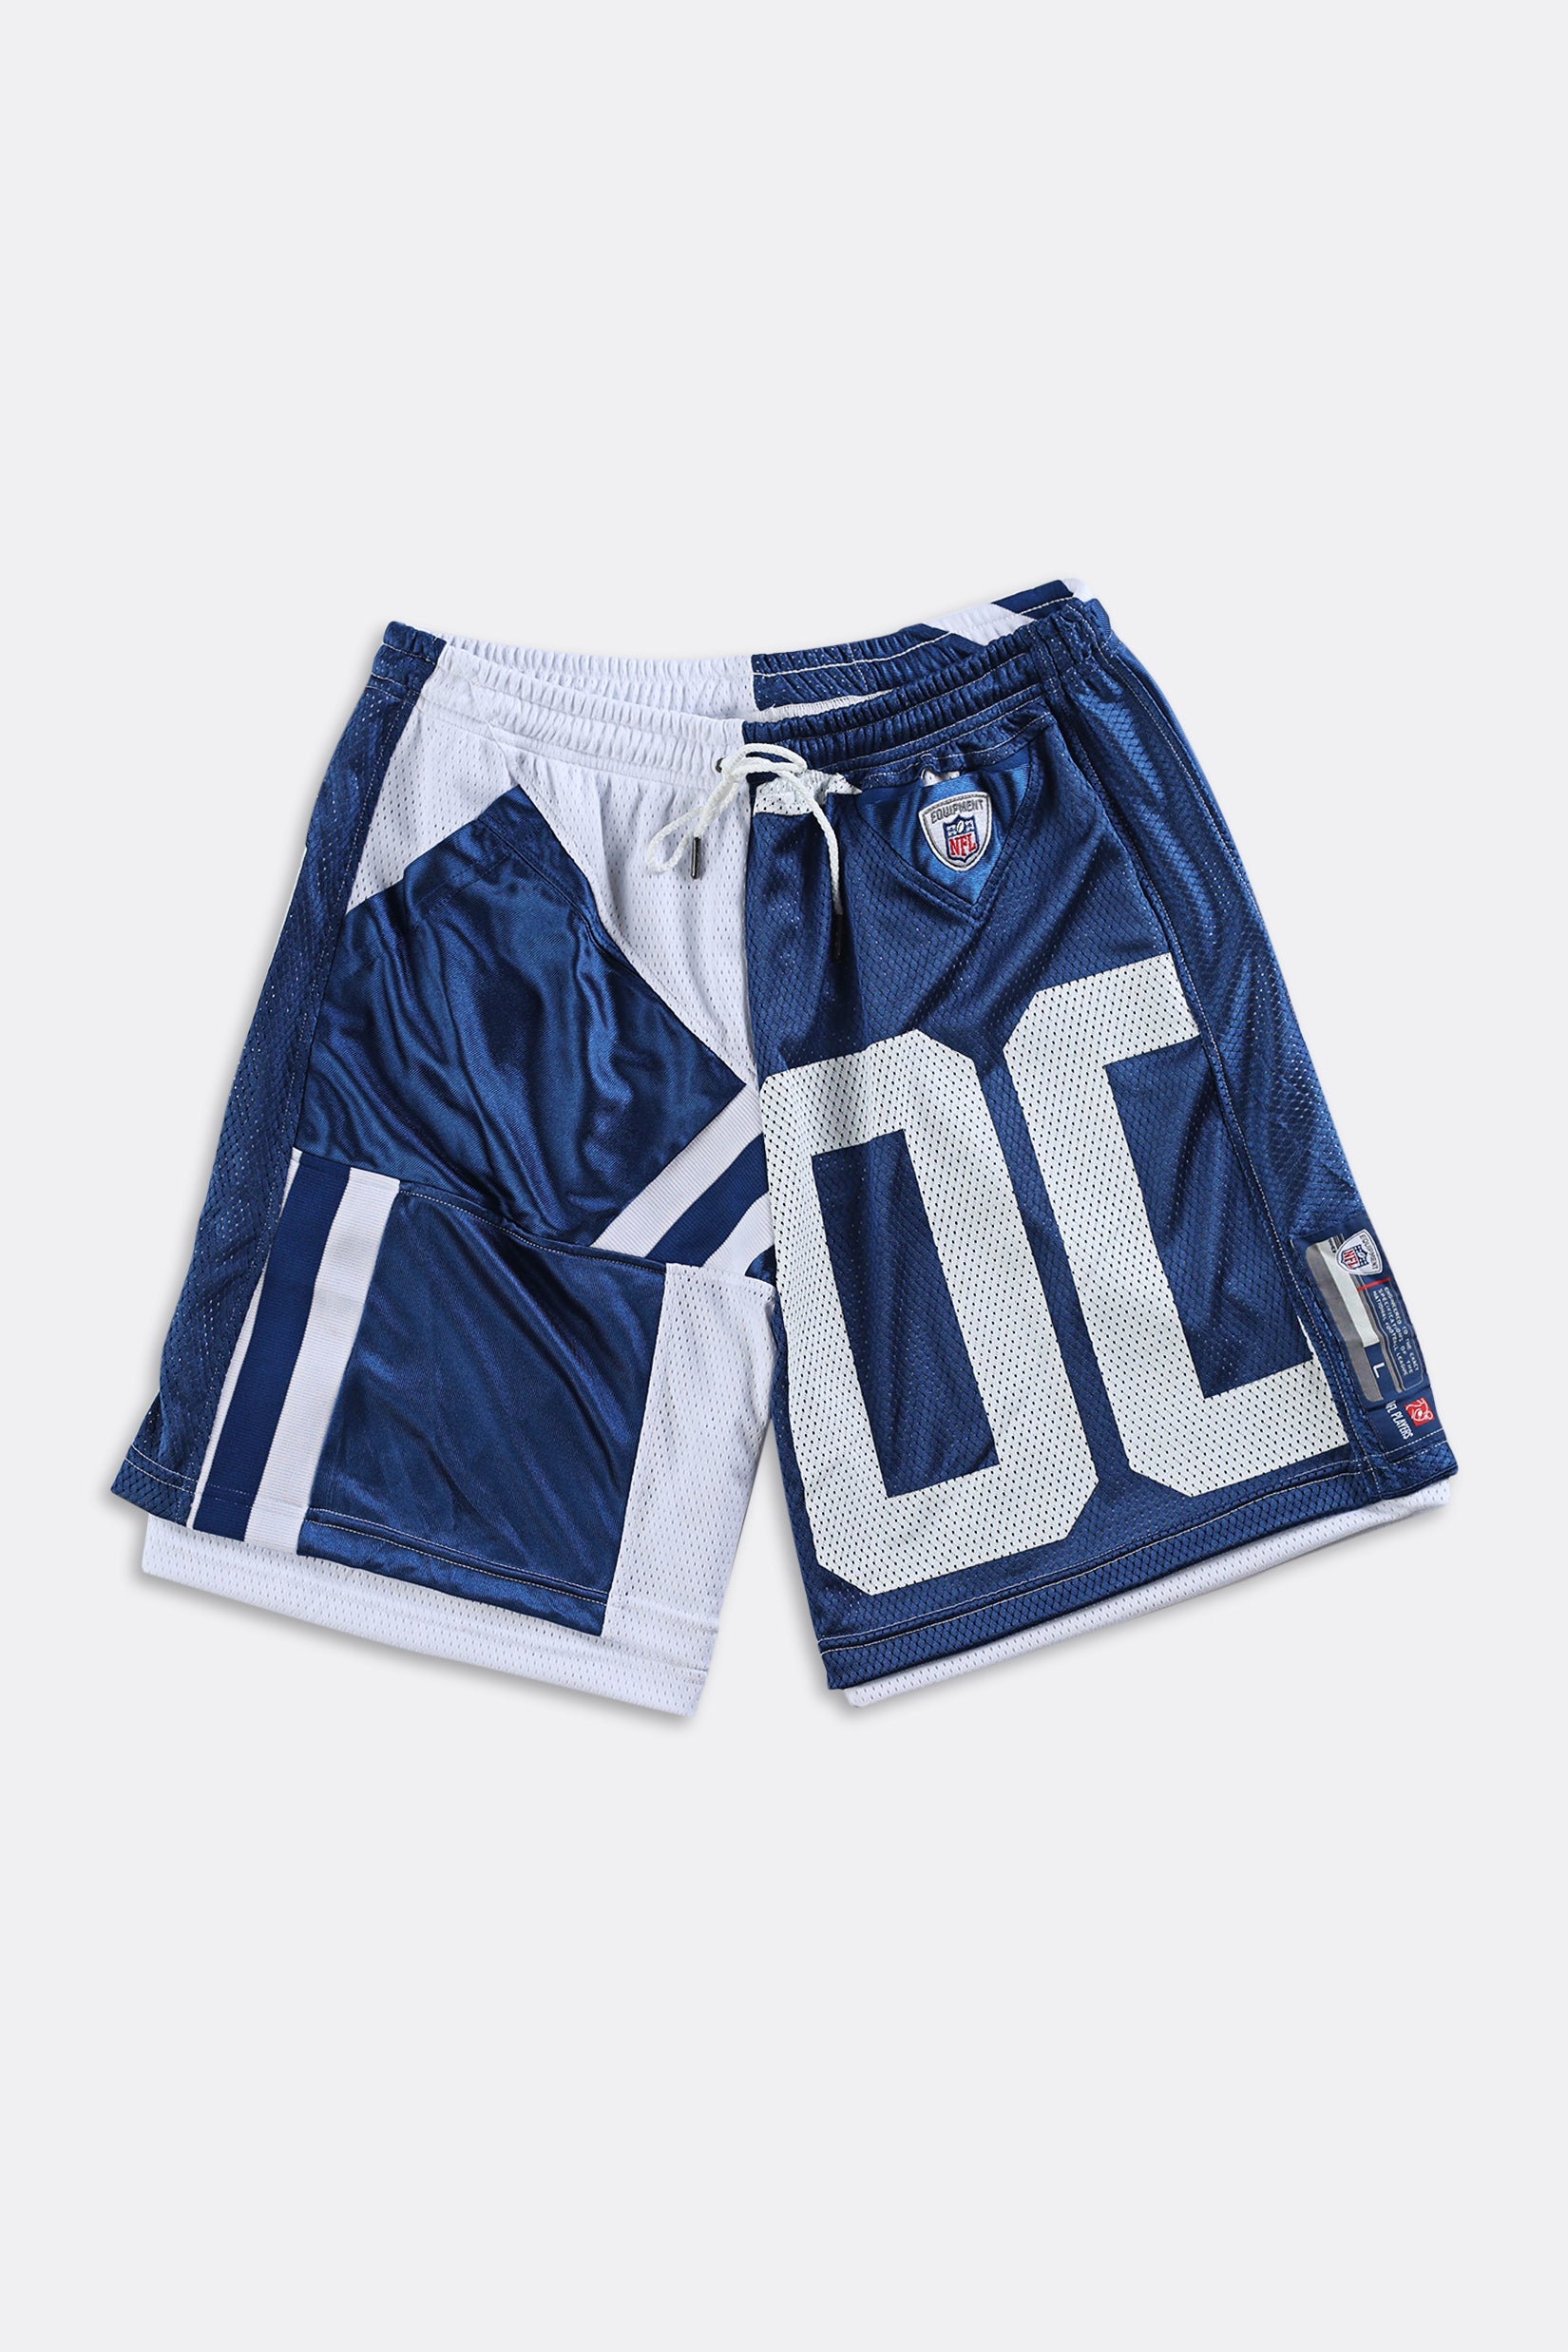 Frankie Collective Rework Rams NFL Jersey Shorts